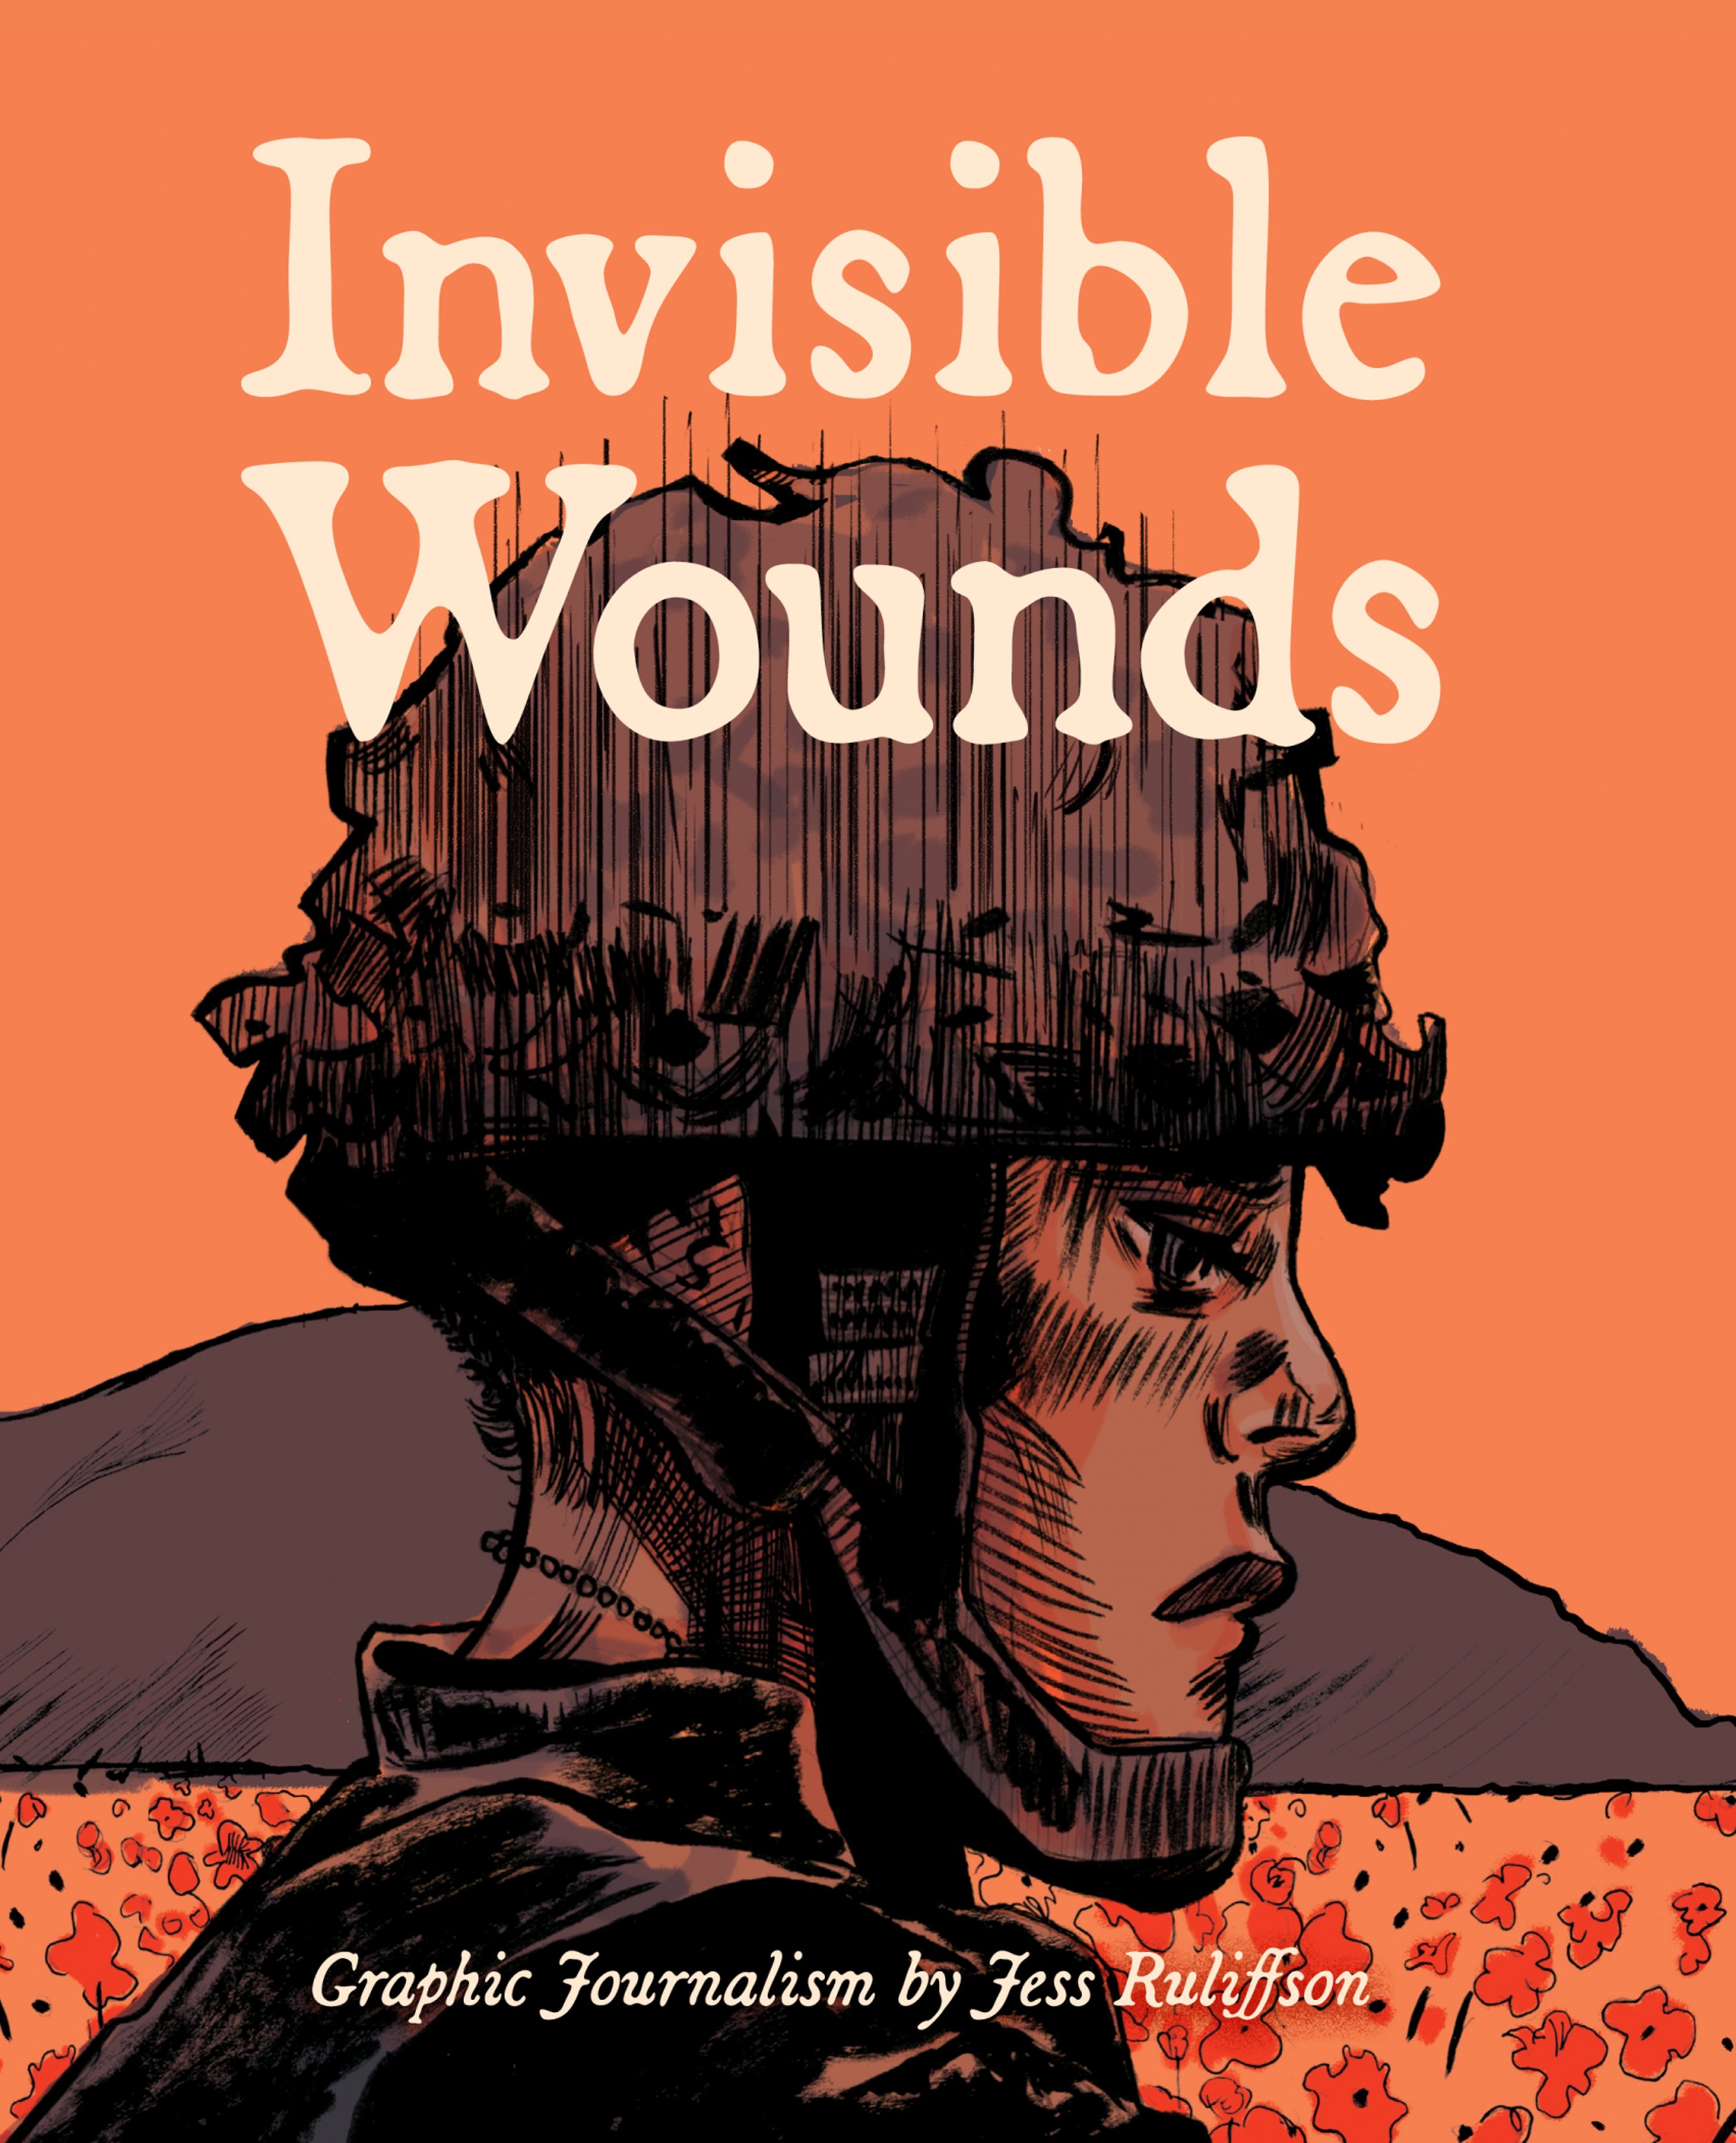 Read online Invisible Wounds: Graphic Journalism by Jess Ruliffson comic -  Issue # TPB (Part 1) - 1